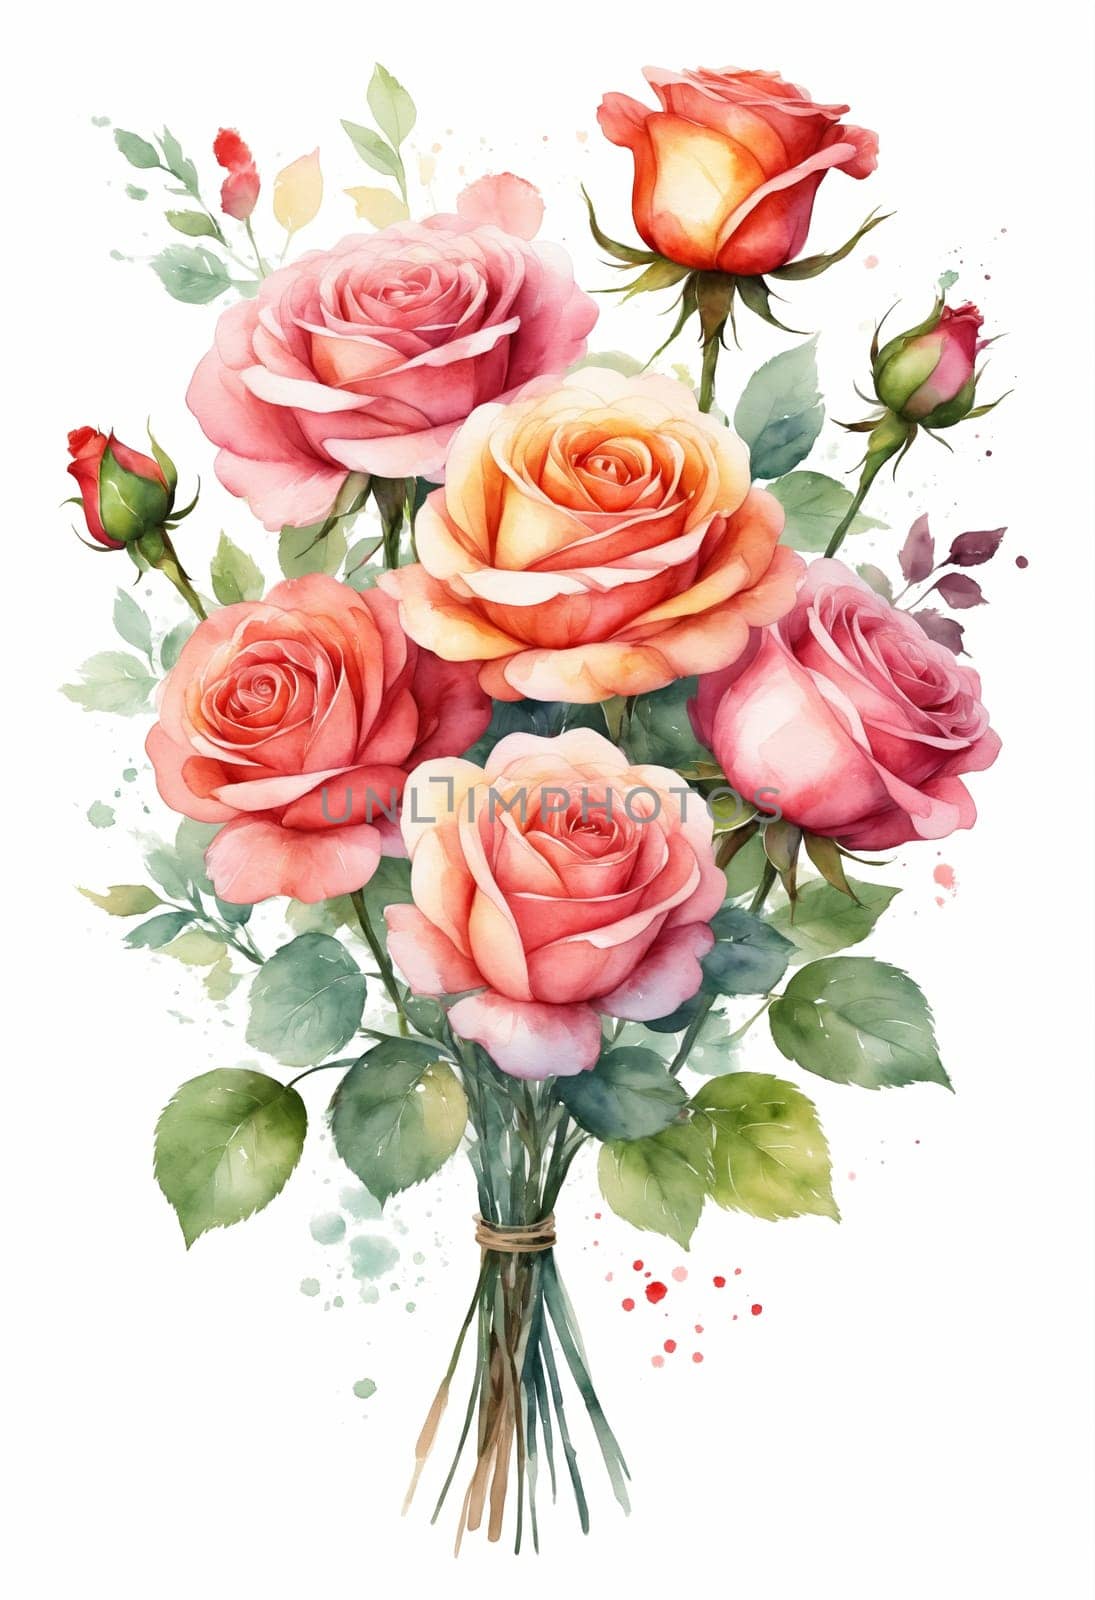 Watercolor bouquet of roses. Hand painted illustration isolated on white background.